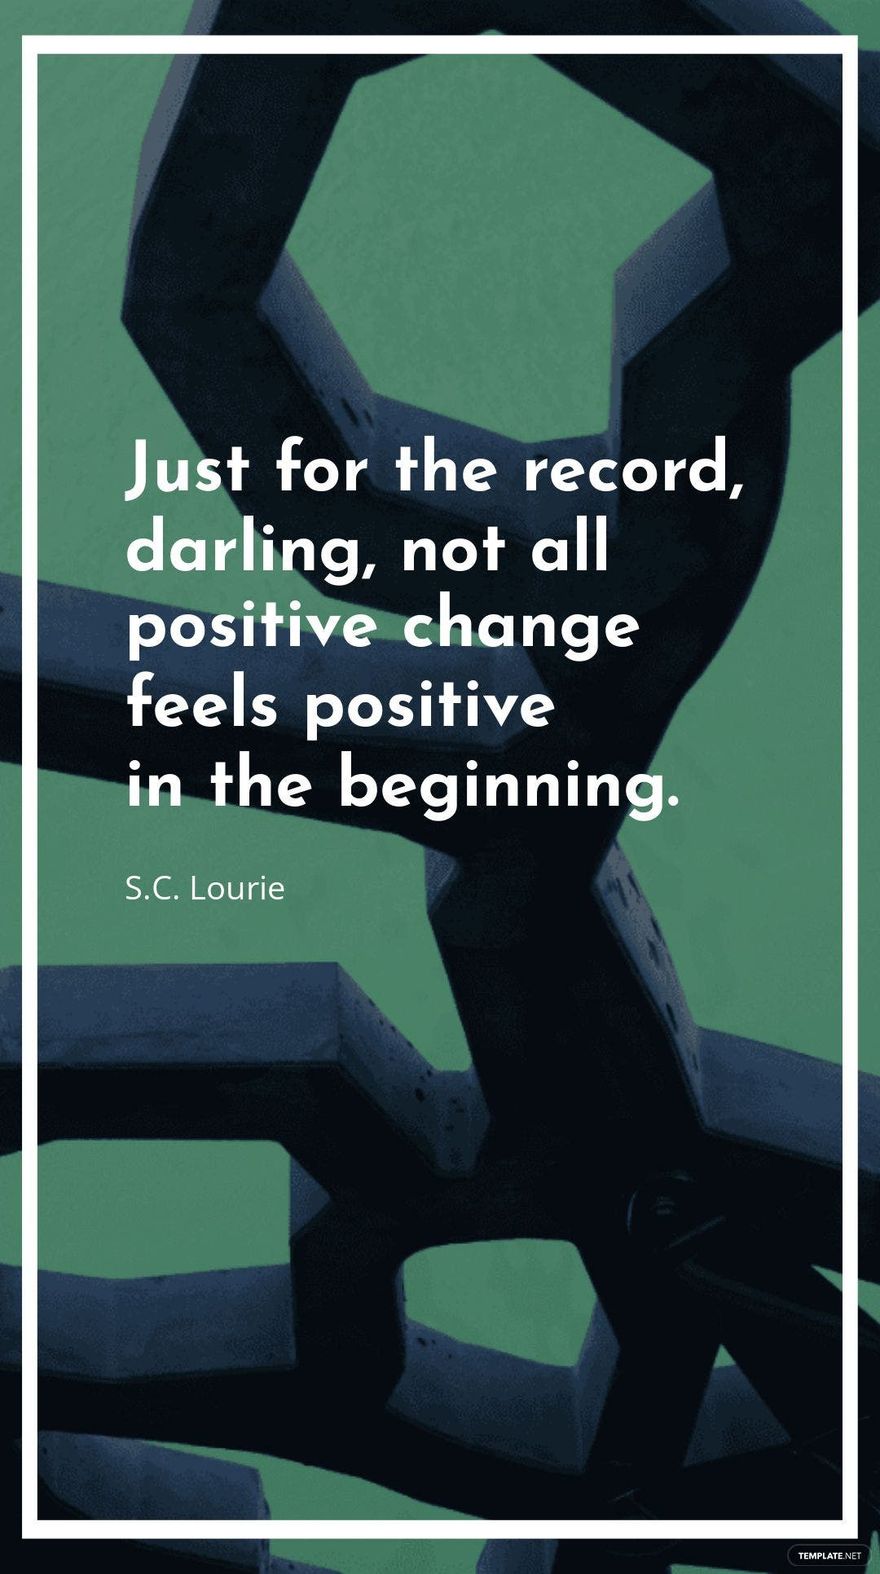 S.C. Lourie - Just for the record, darling, not all positive change feels positive in the beginning.